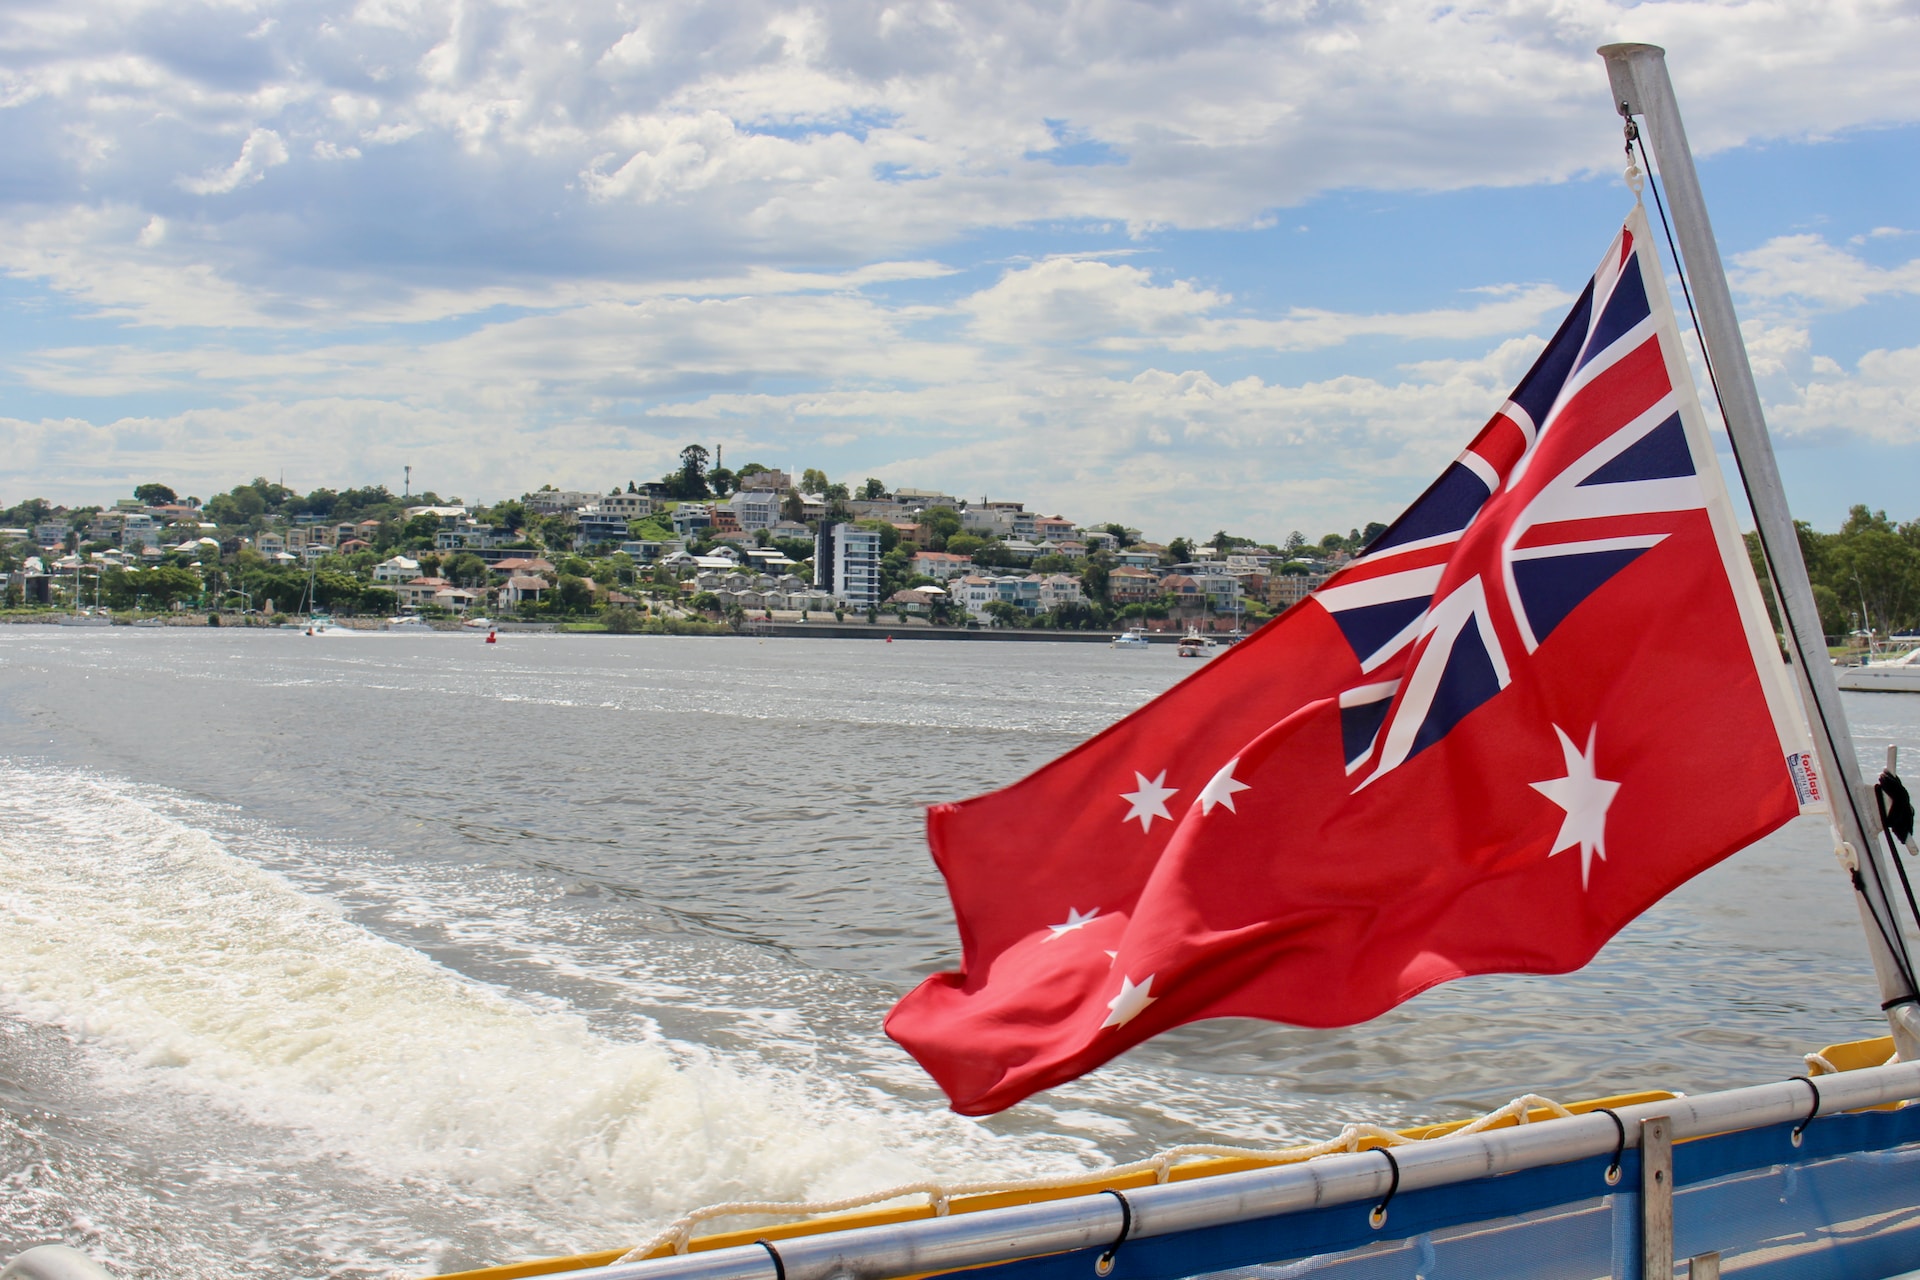 The Australian flag flying from the stern of a boat